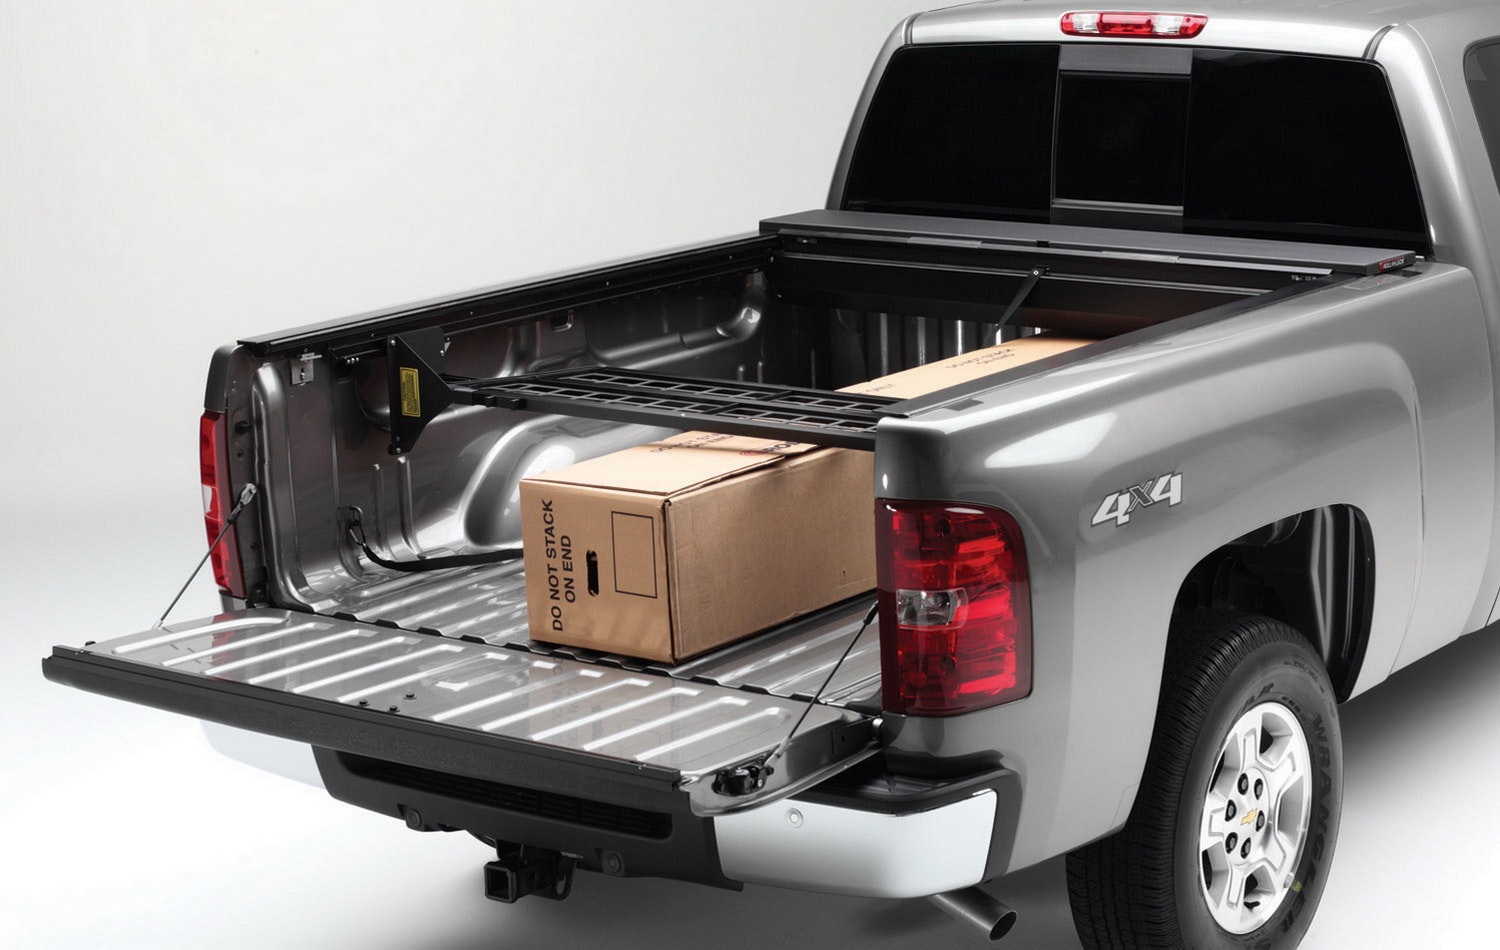 Details about   Roll-N-Lock Cargo Manager Truck Divider For 07-18 Toyota Tundra 6.5' Bed CM571